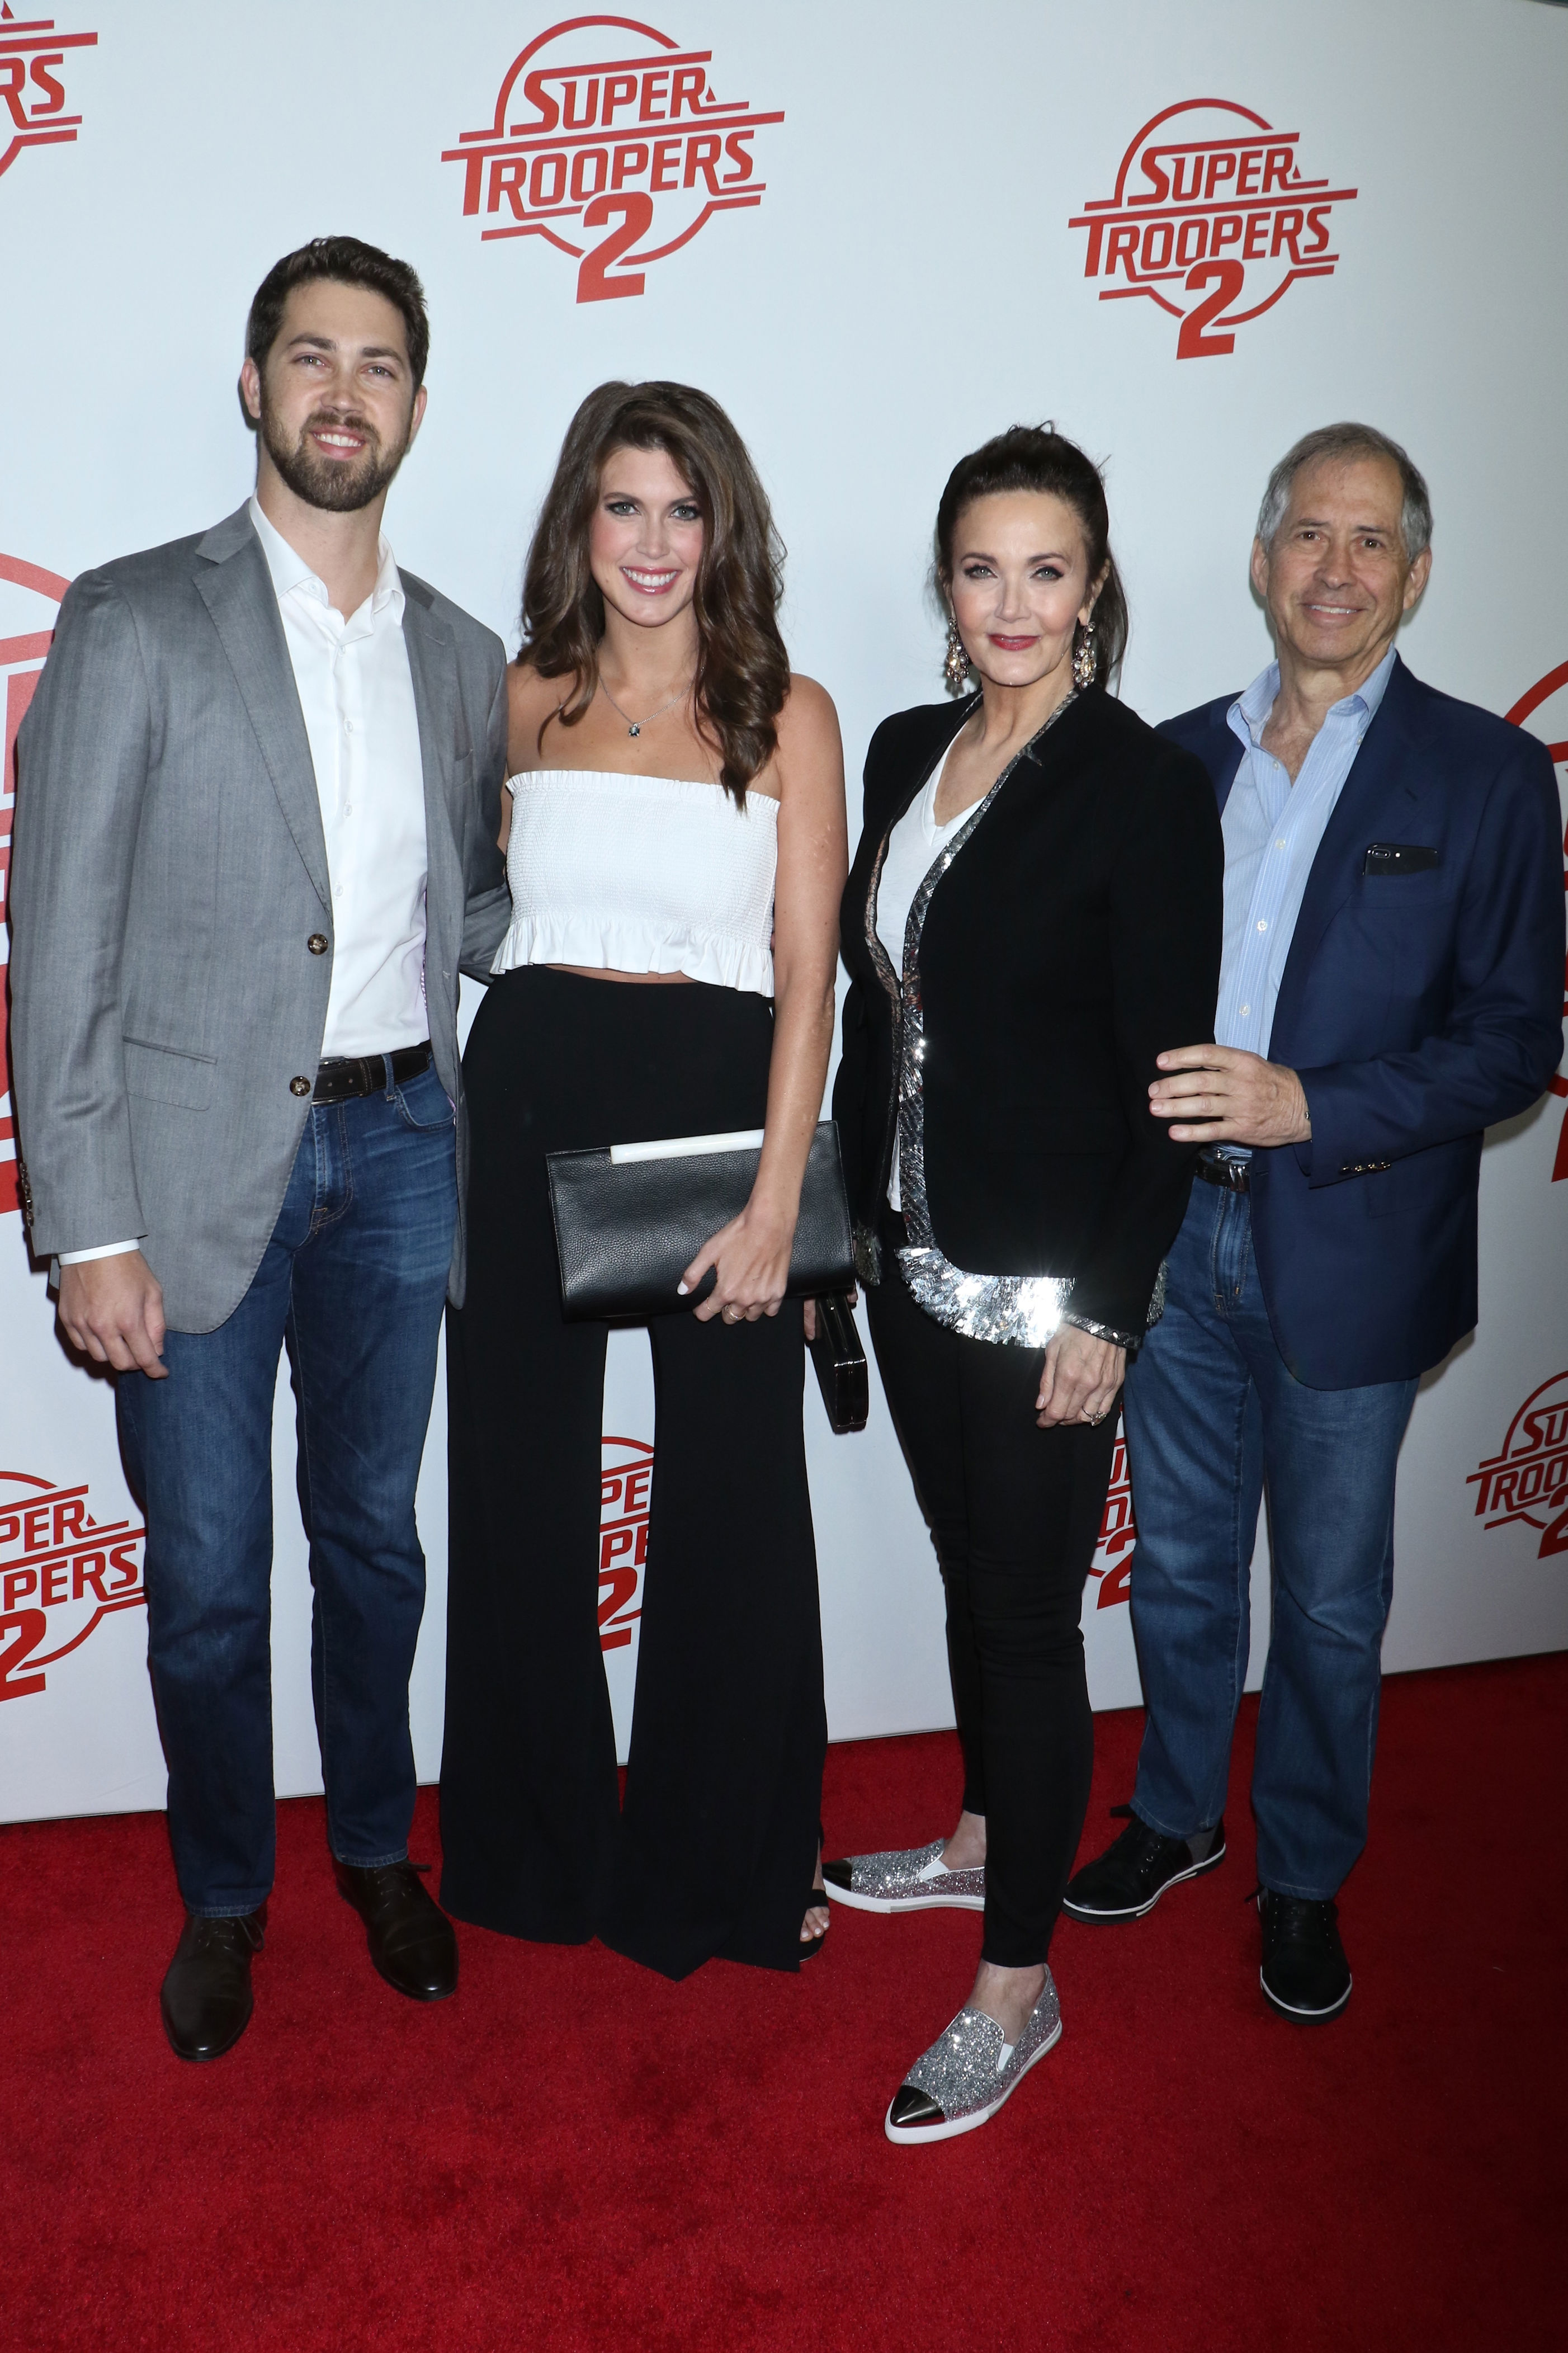 <p>All grown up! "Wonder Woman" star Lynda Carter stepped out with her gorgeous kids -- James Altman and Jessica Altman, who are now both lawyers -- and her attorney husband, Robert A. Altman (who passed away in 2021), at the April 18, 2018, premiere of "<a href="https://www.wonderwall.com/entertainment/movies/super-troopers-actors-how-theyve-changed-where-are-they-now-3013730.gallery">Super Troopers 2</a>" in New York City.</p>